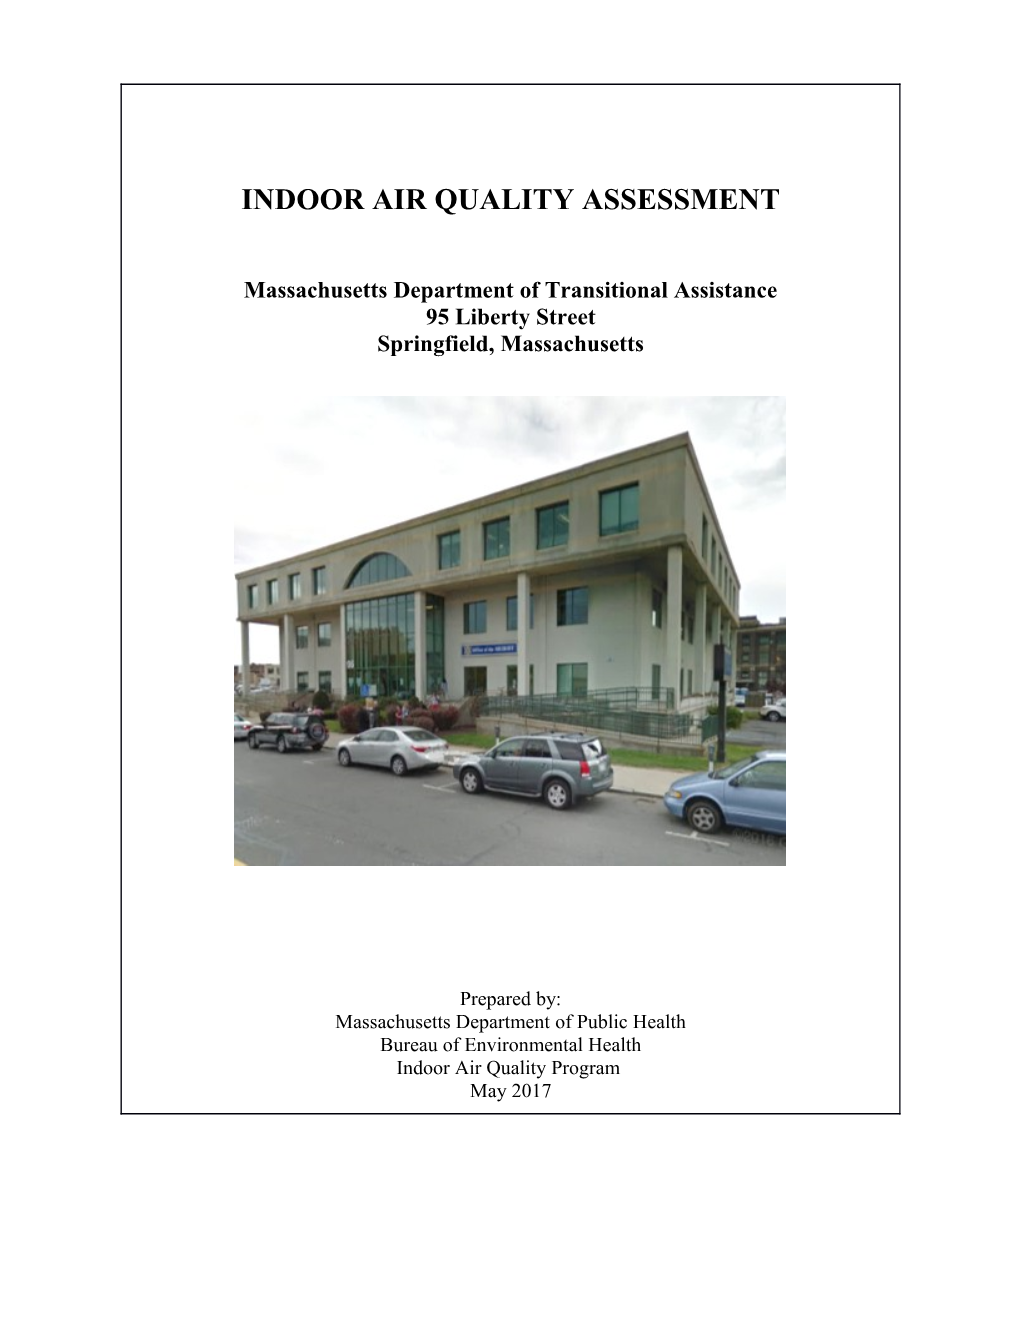 Indoor Air Quality Assessment - Massachusetts Department of Transitional Assistance